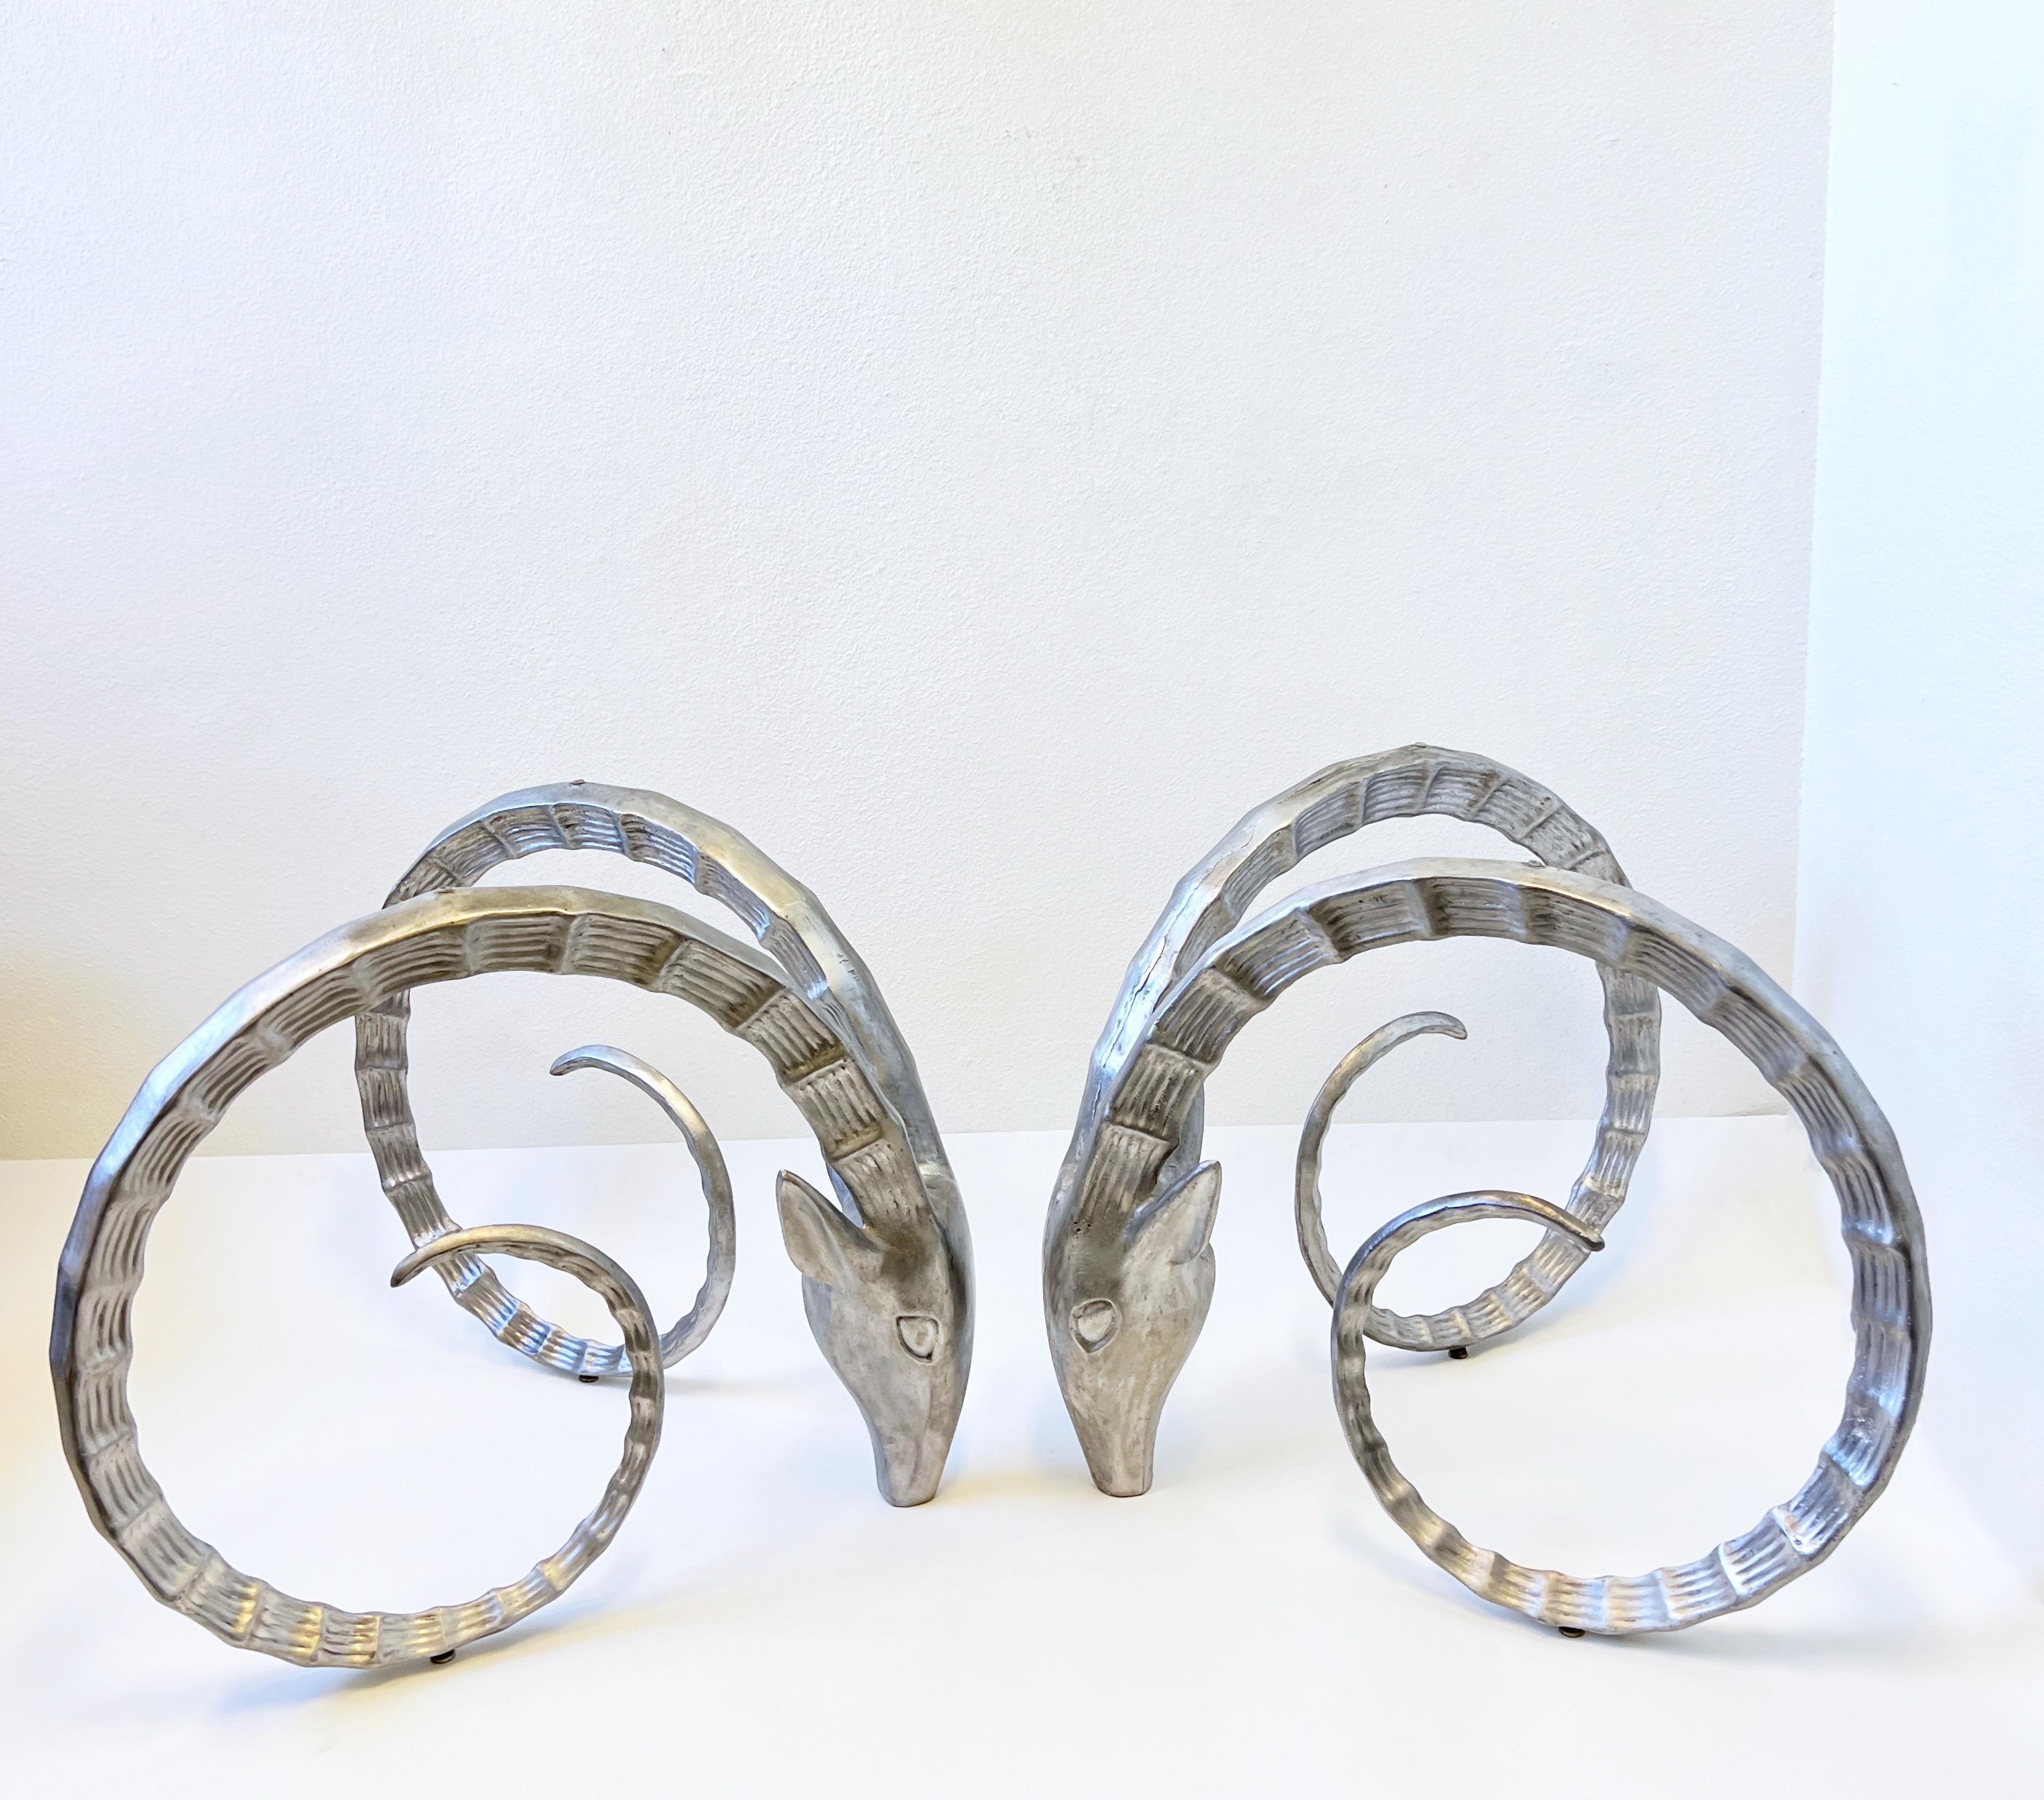 Amazing pair of cast aluminum rams head dining table bases from the 1980’s. 
They have a satin finish, can be polished or powder coated if desired. 
You can use a rectangular or round top on them. 
We can order a glass top for an additional price